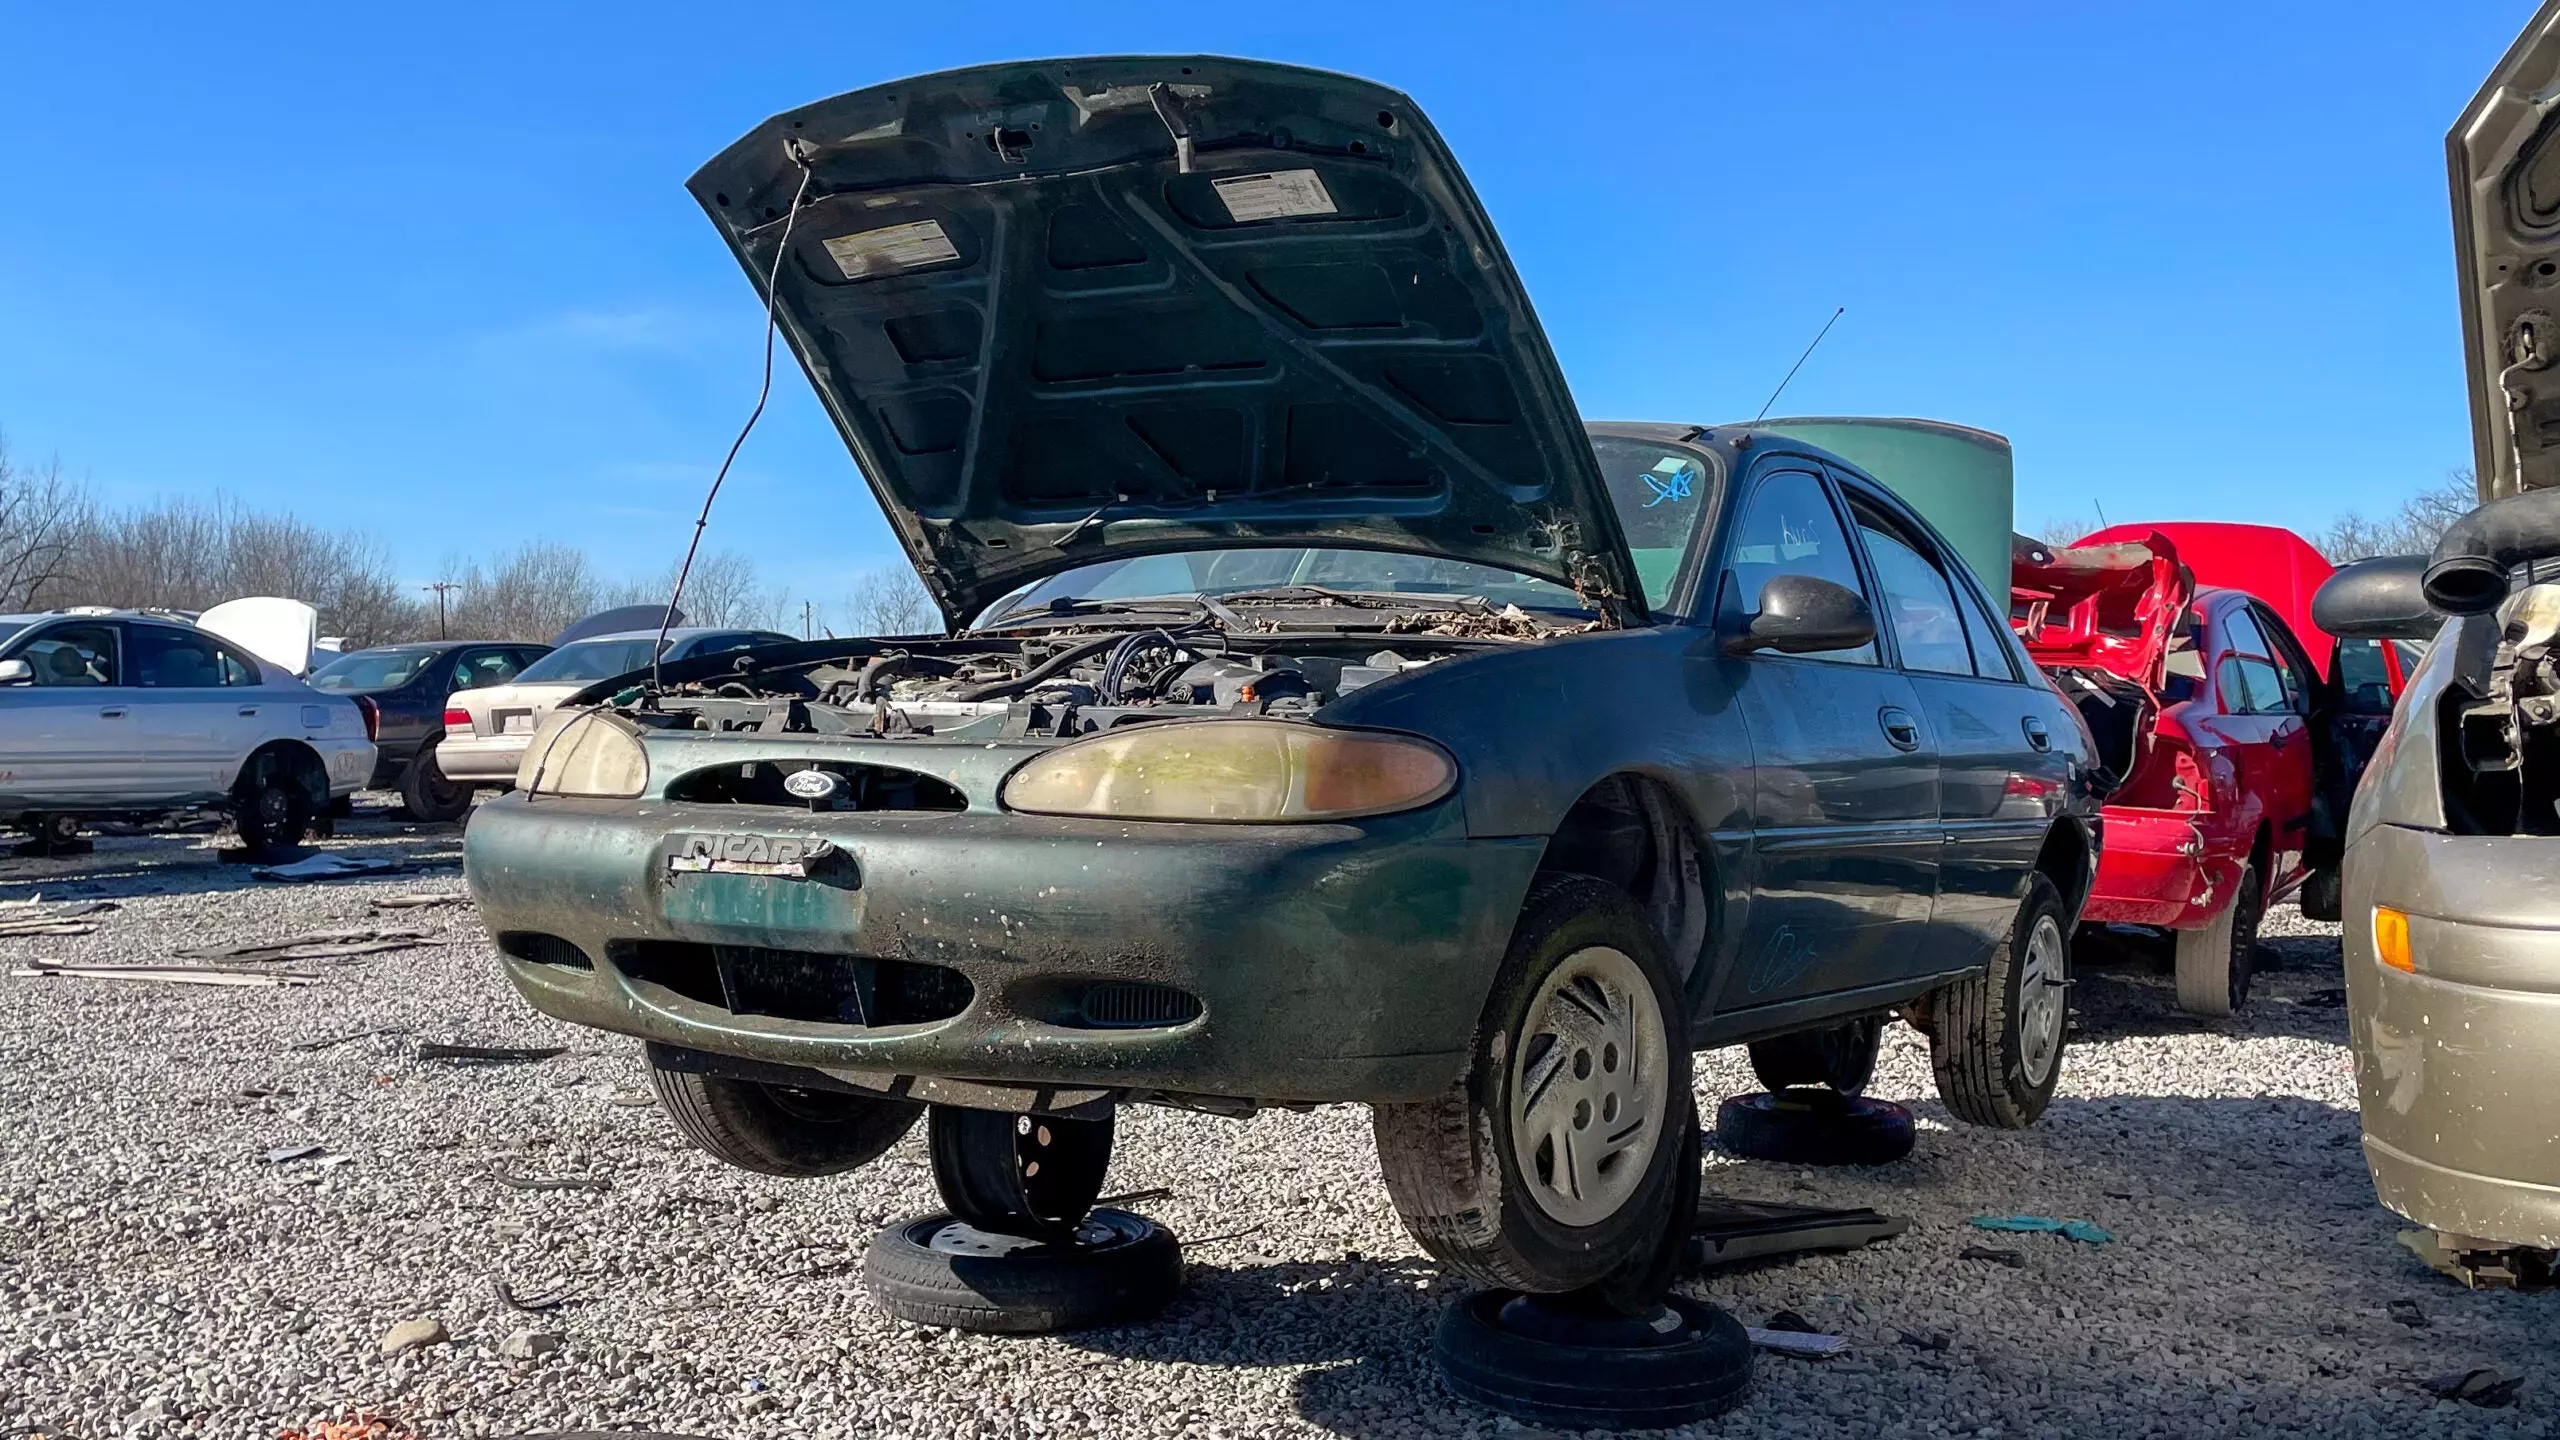 Finding This Remarkably Unrusty Ford Escort in an Ohio Junkyard Made Me Wonder About Its Life | Autance